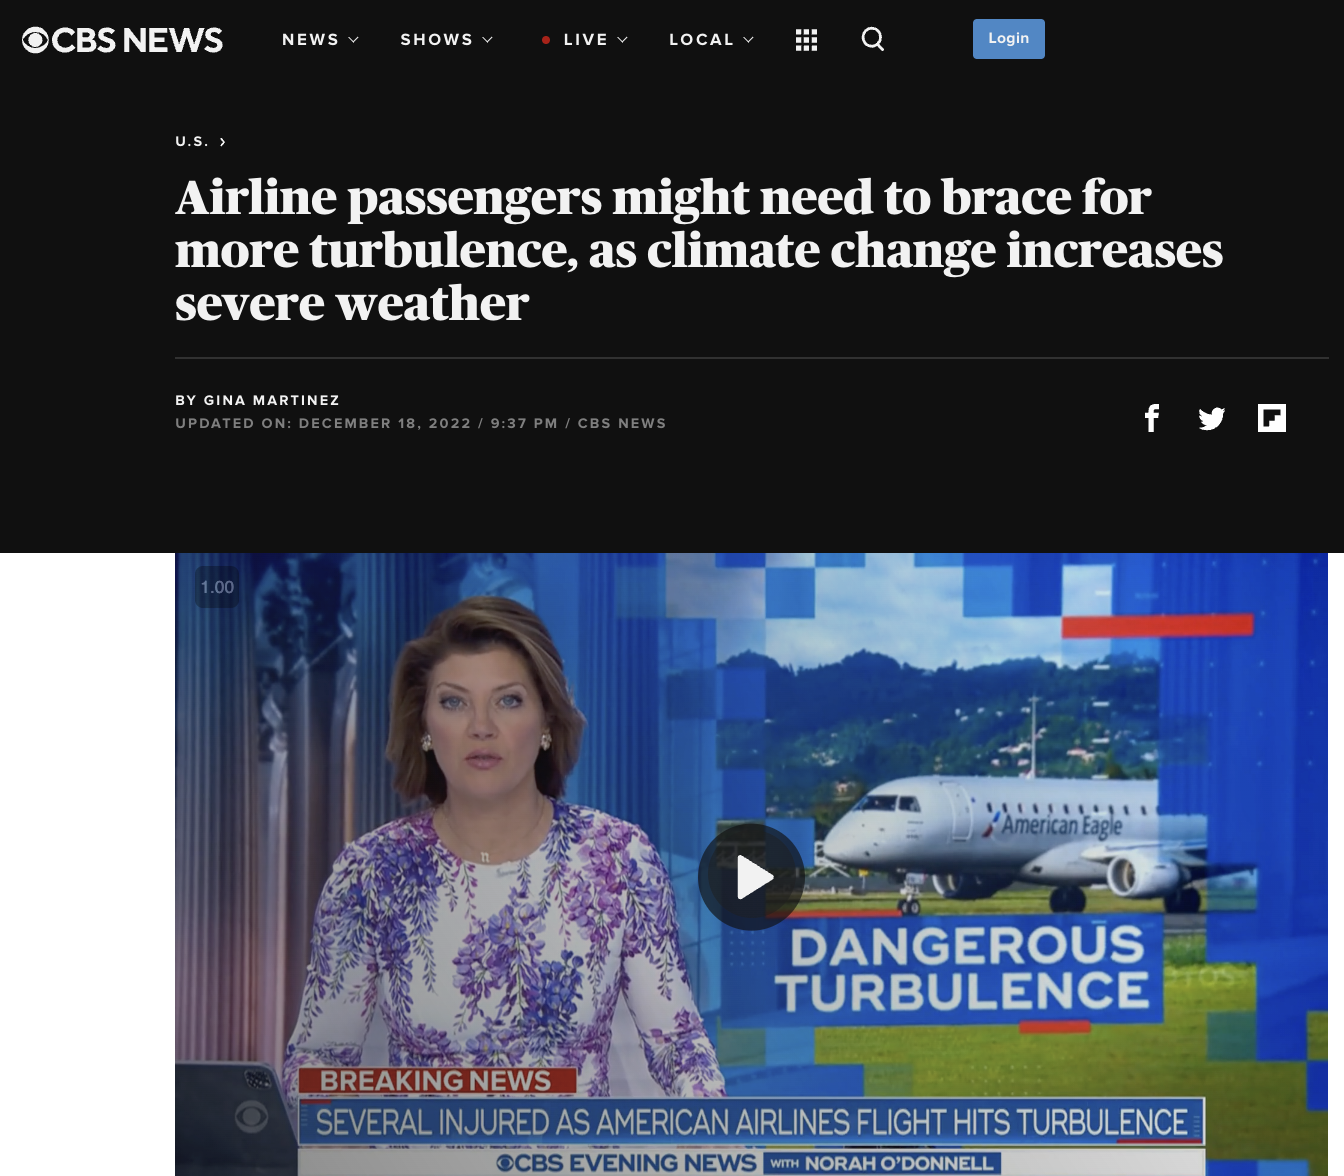 CBS News: Airline passengers might need to brace for more turbulence — ‘Thanks to climate change’